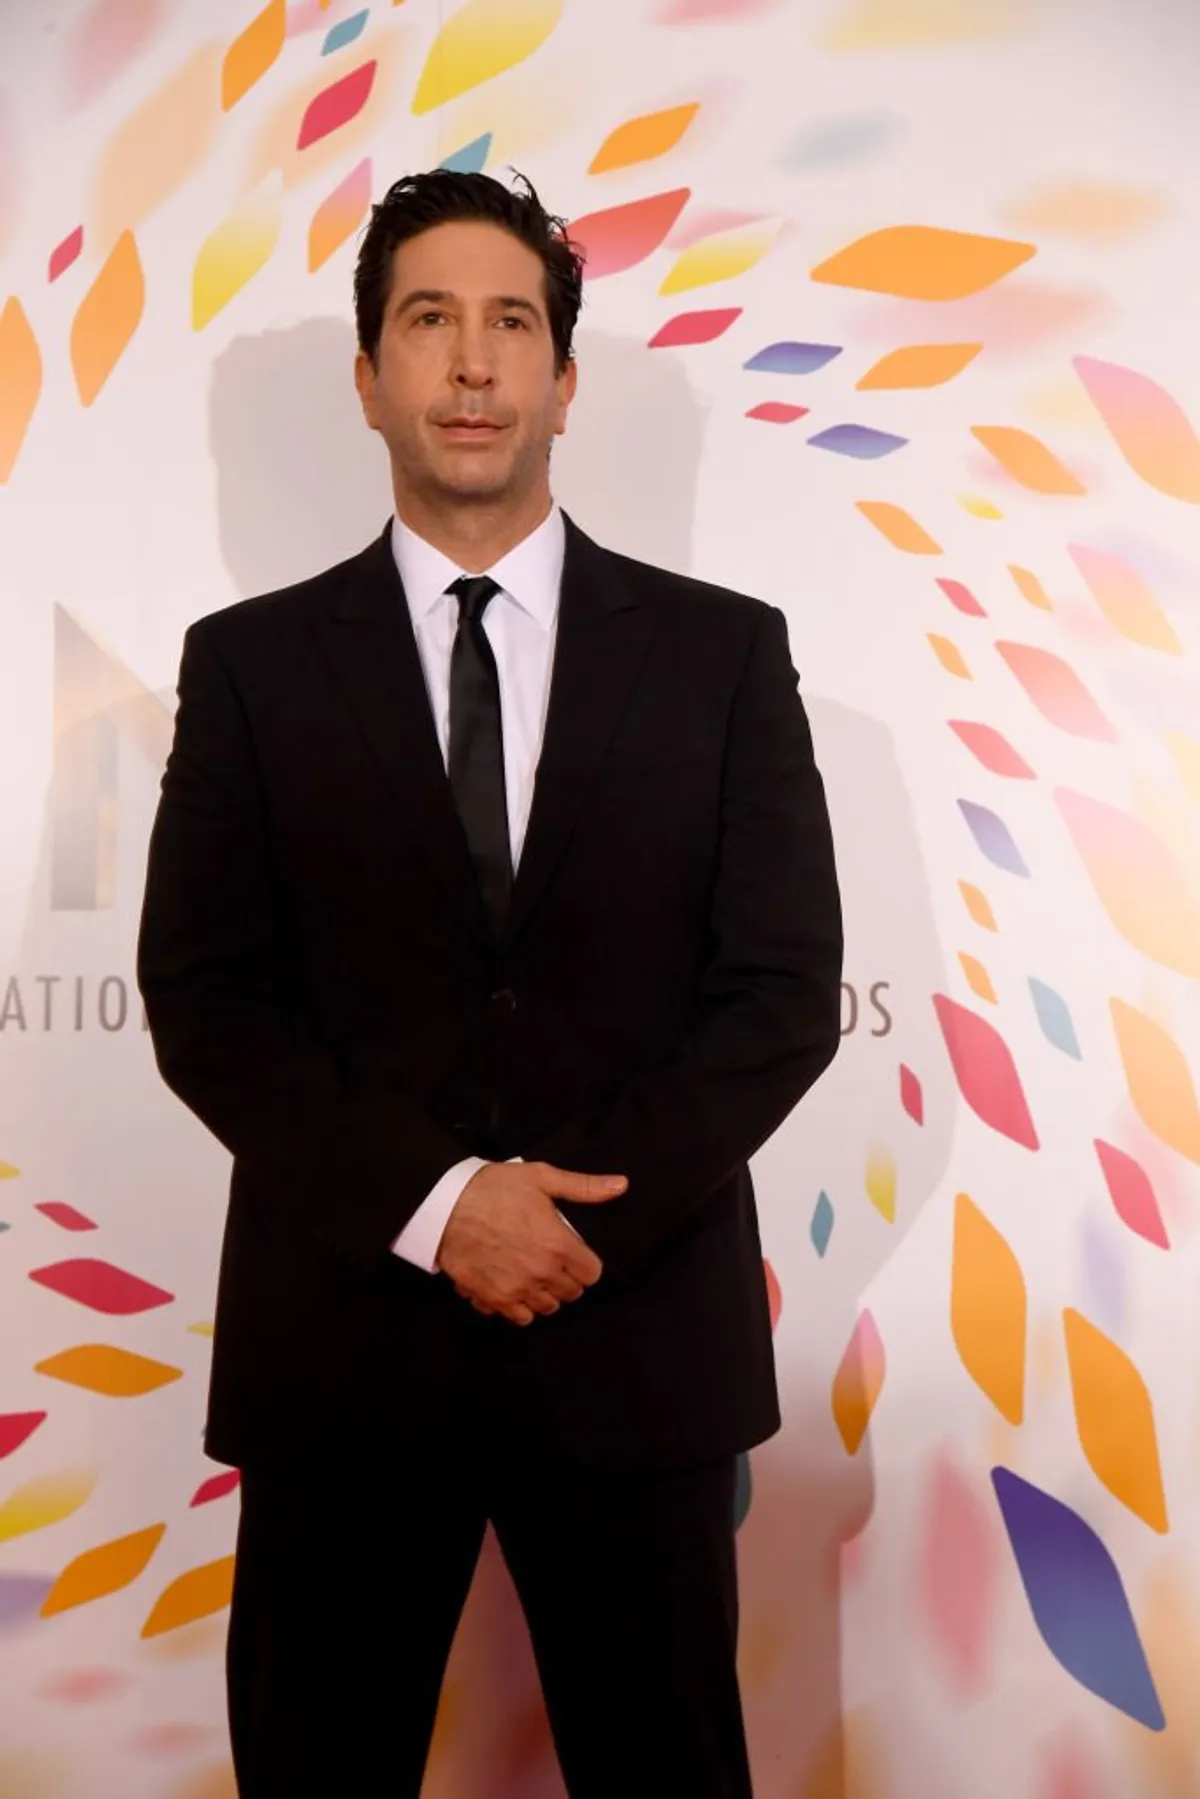 David Schwimmer attends the National Television Awards 2020 at The O2 Arena on January 28, 2020 | Photo: Getty Images